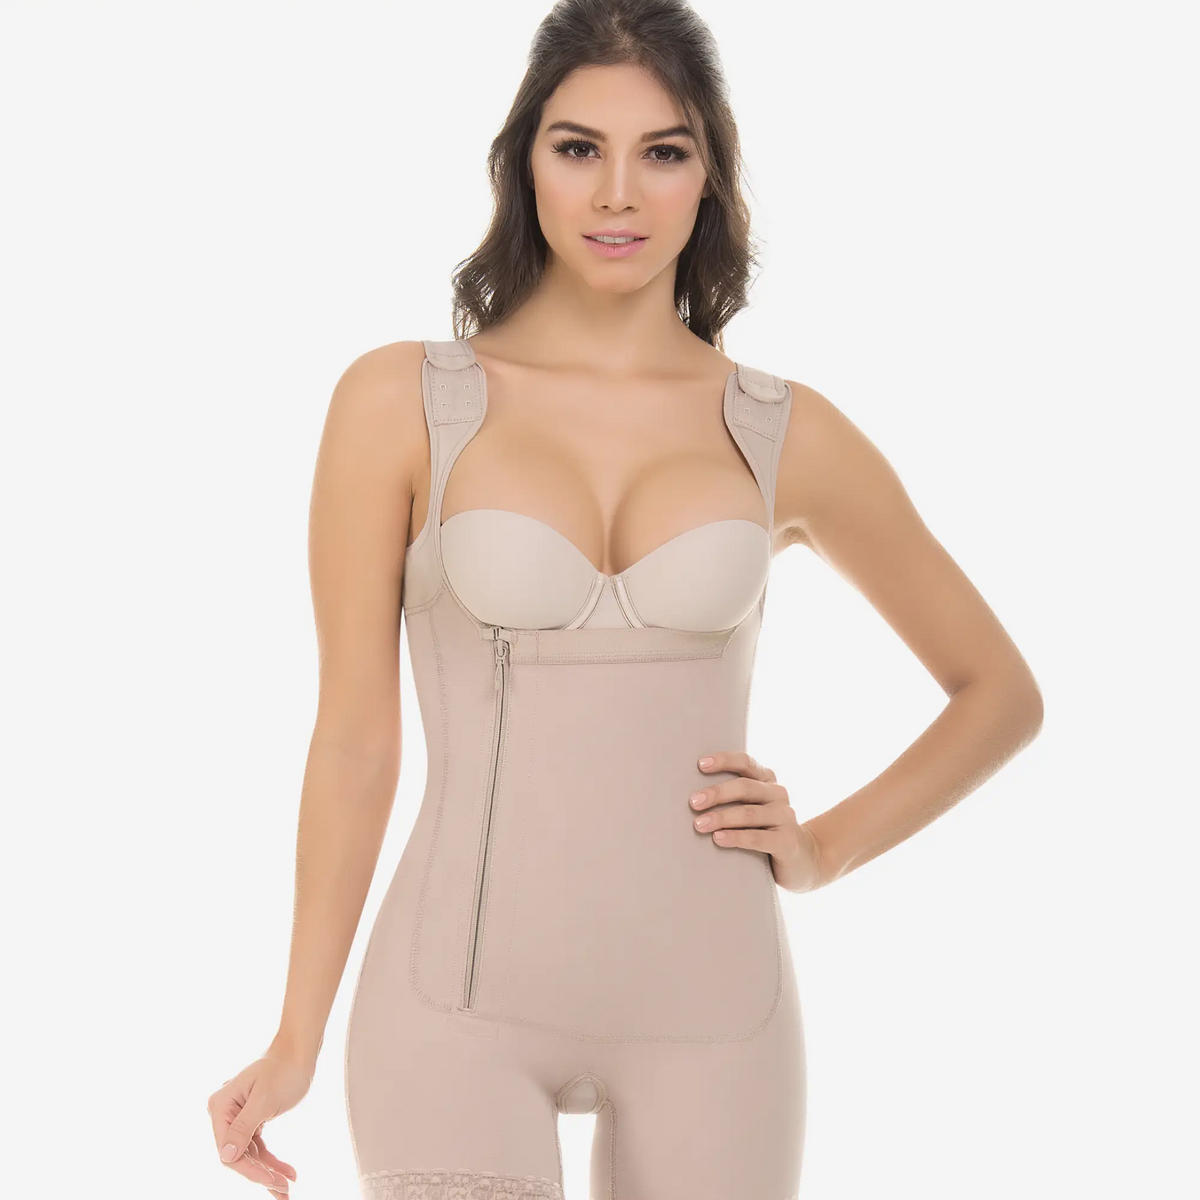 Shapewear for Women Tummy Control 2 Pack - Stomach Palestine